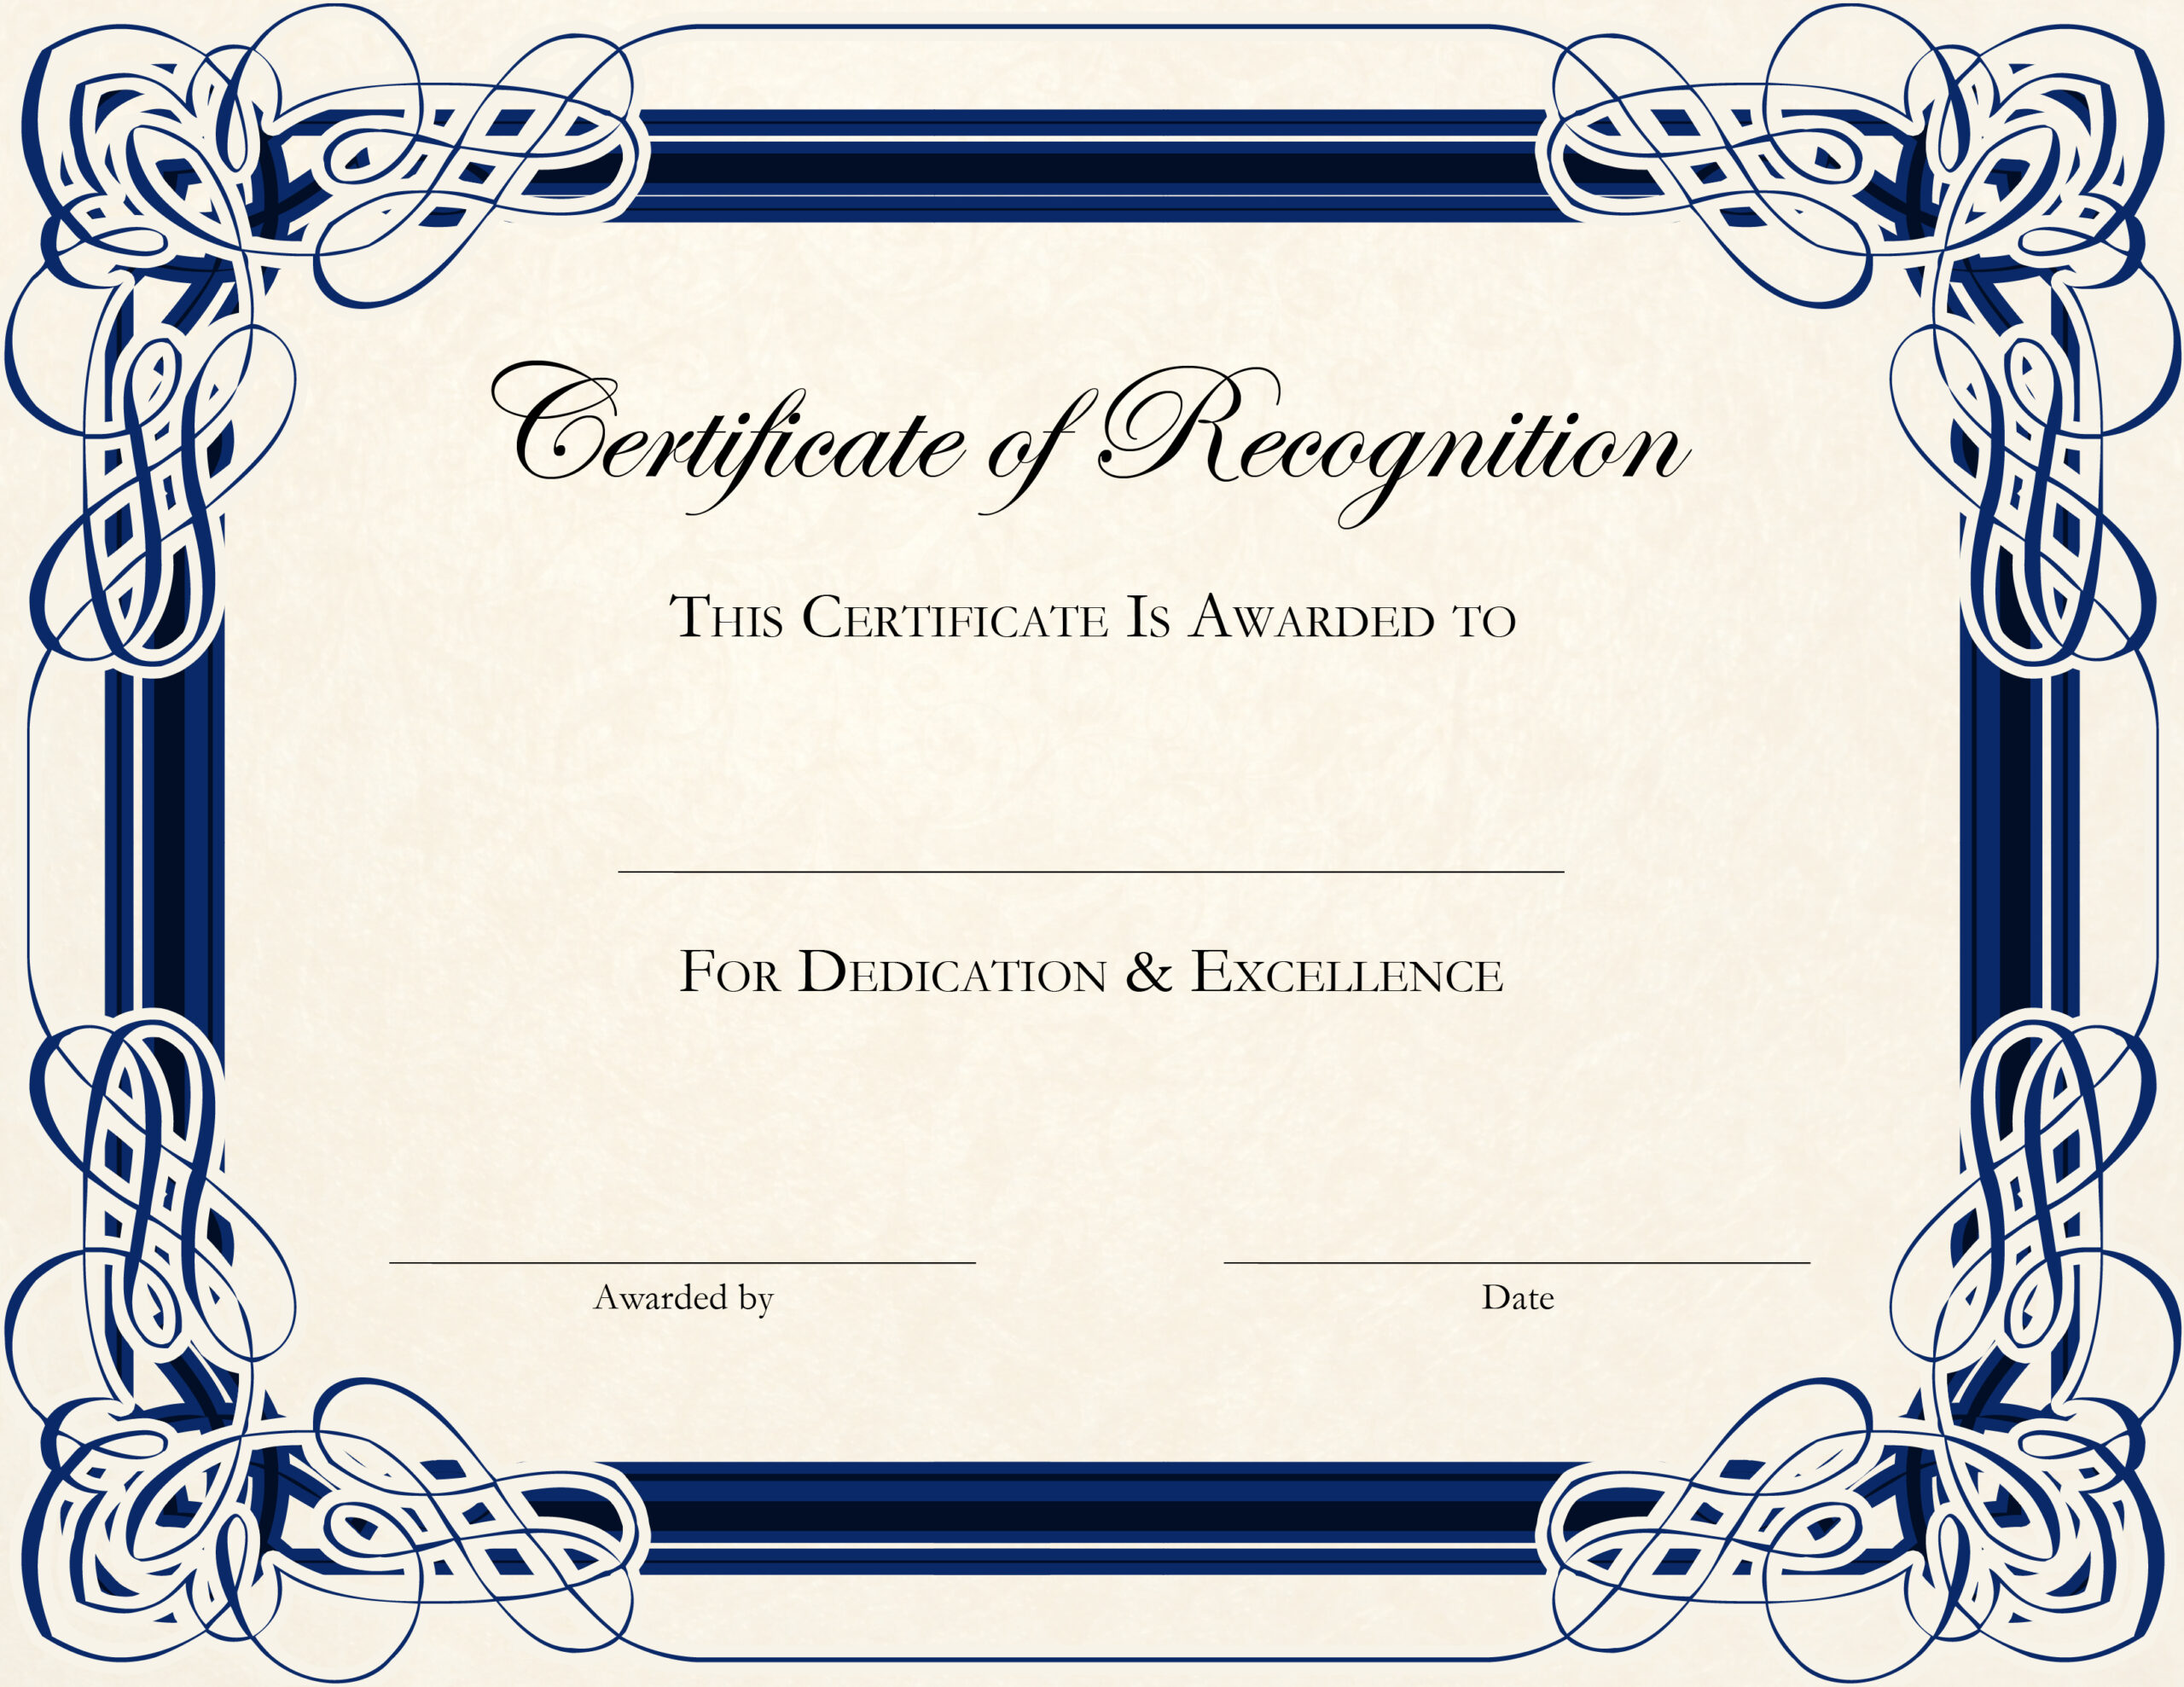 Certificate Of Appreciation Template Word - Task List Templates inside Fresh Thanks Certificate Template